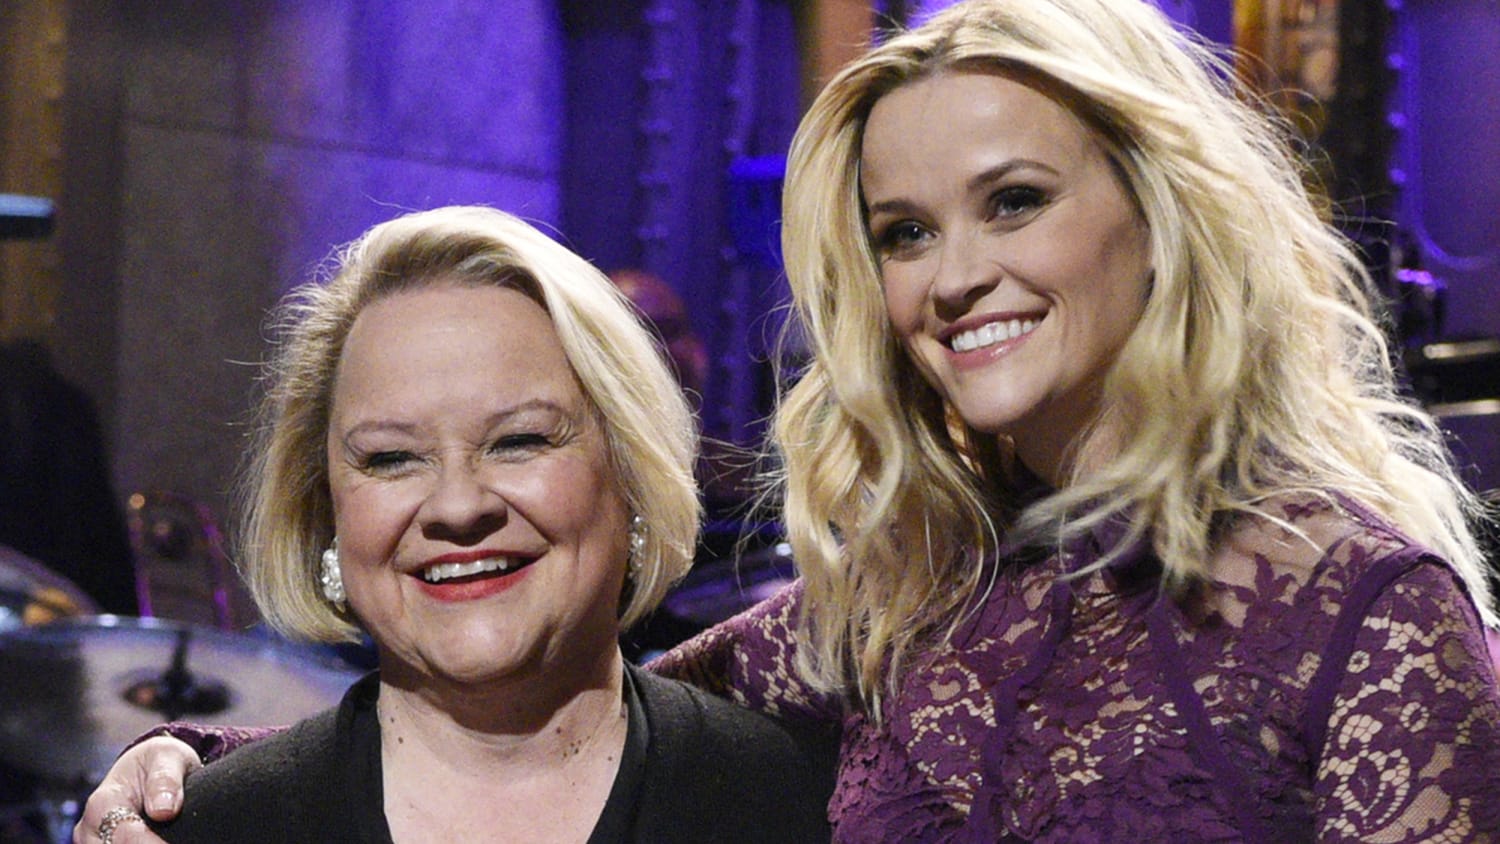 Reese Witherspoon interviews her mom for Facebook Watch